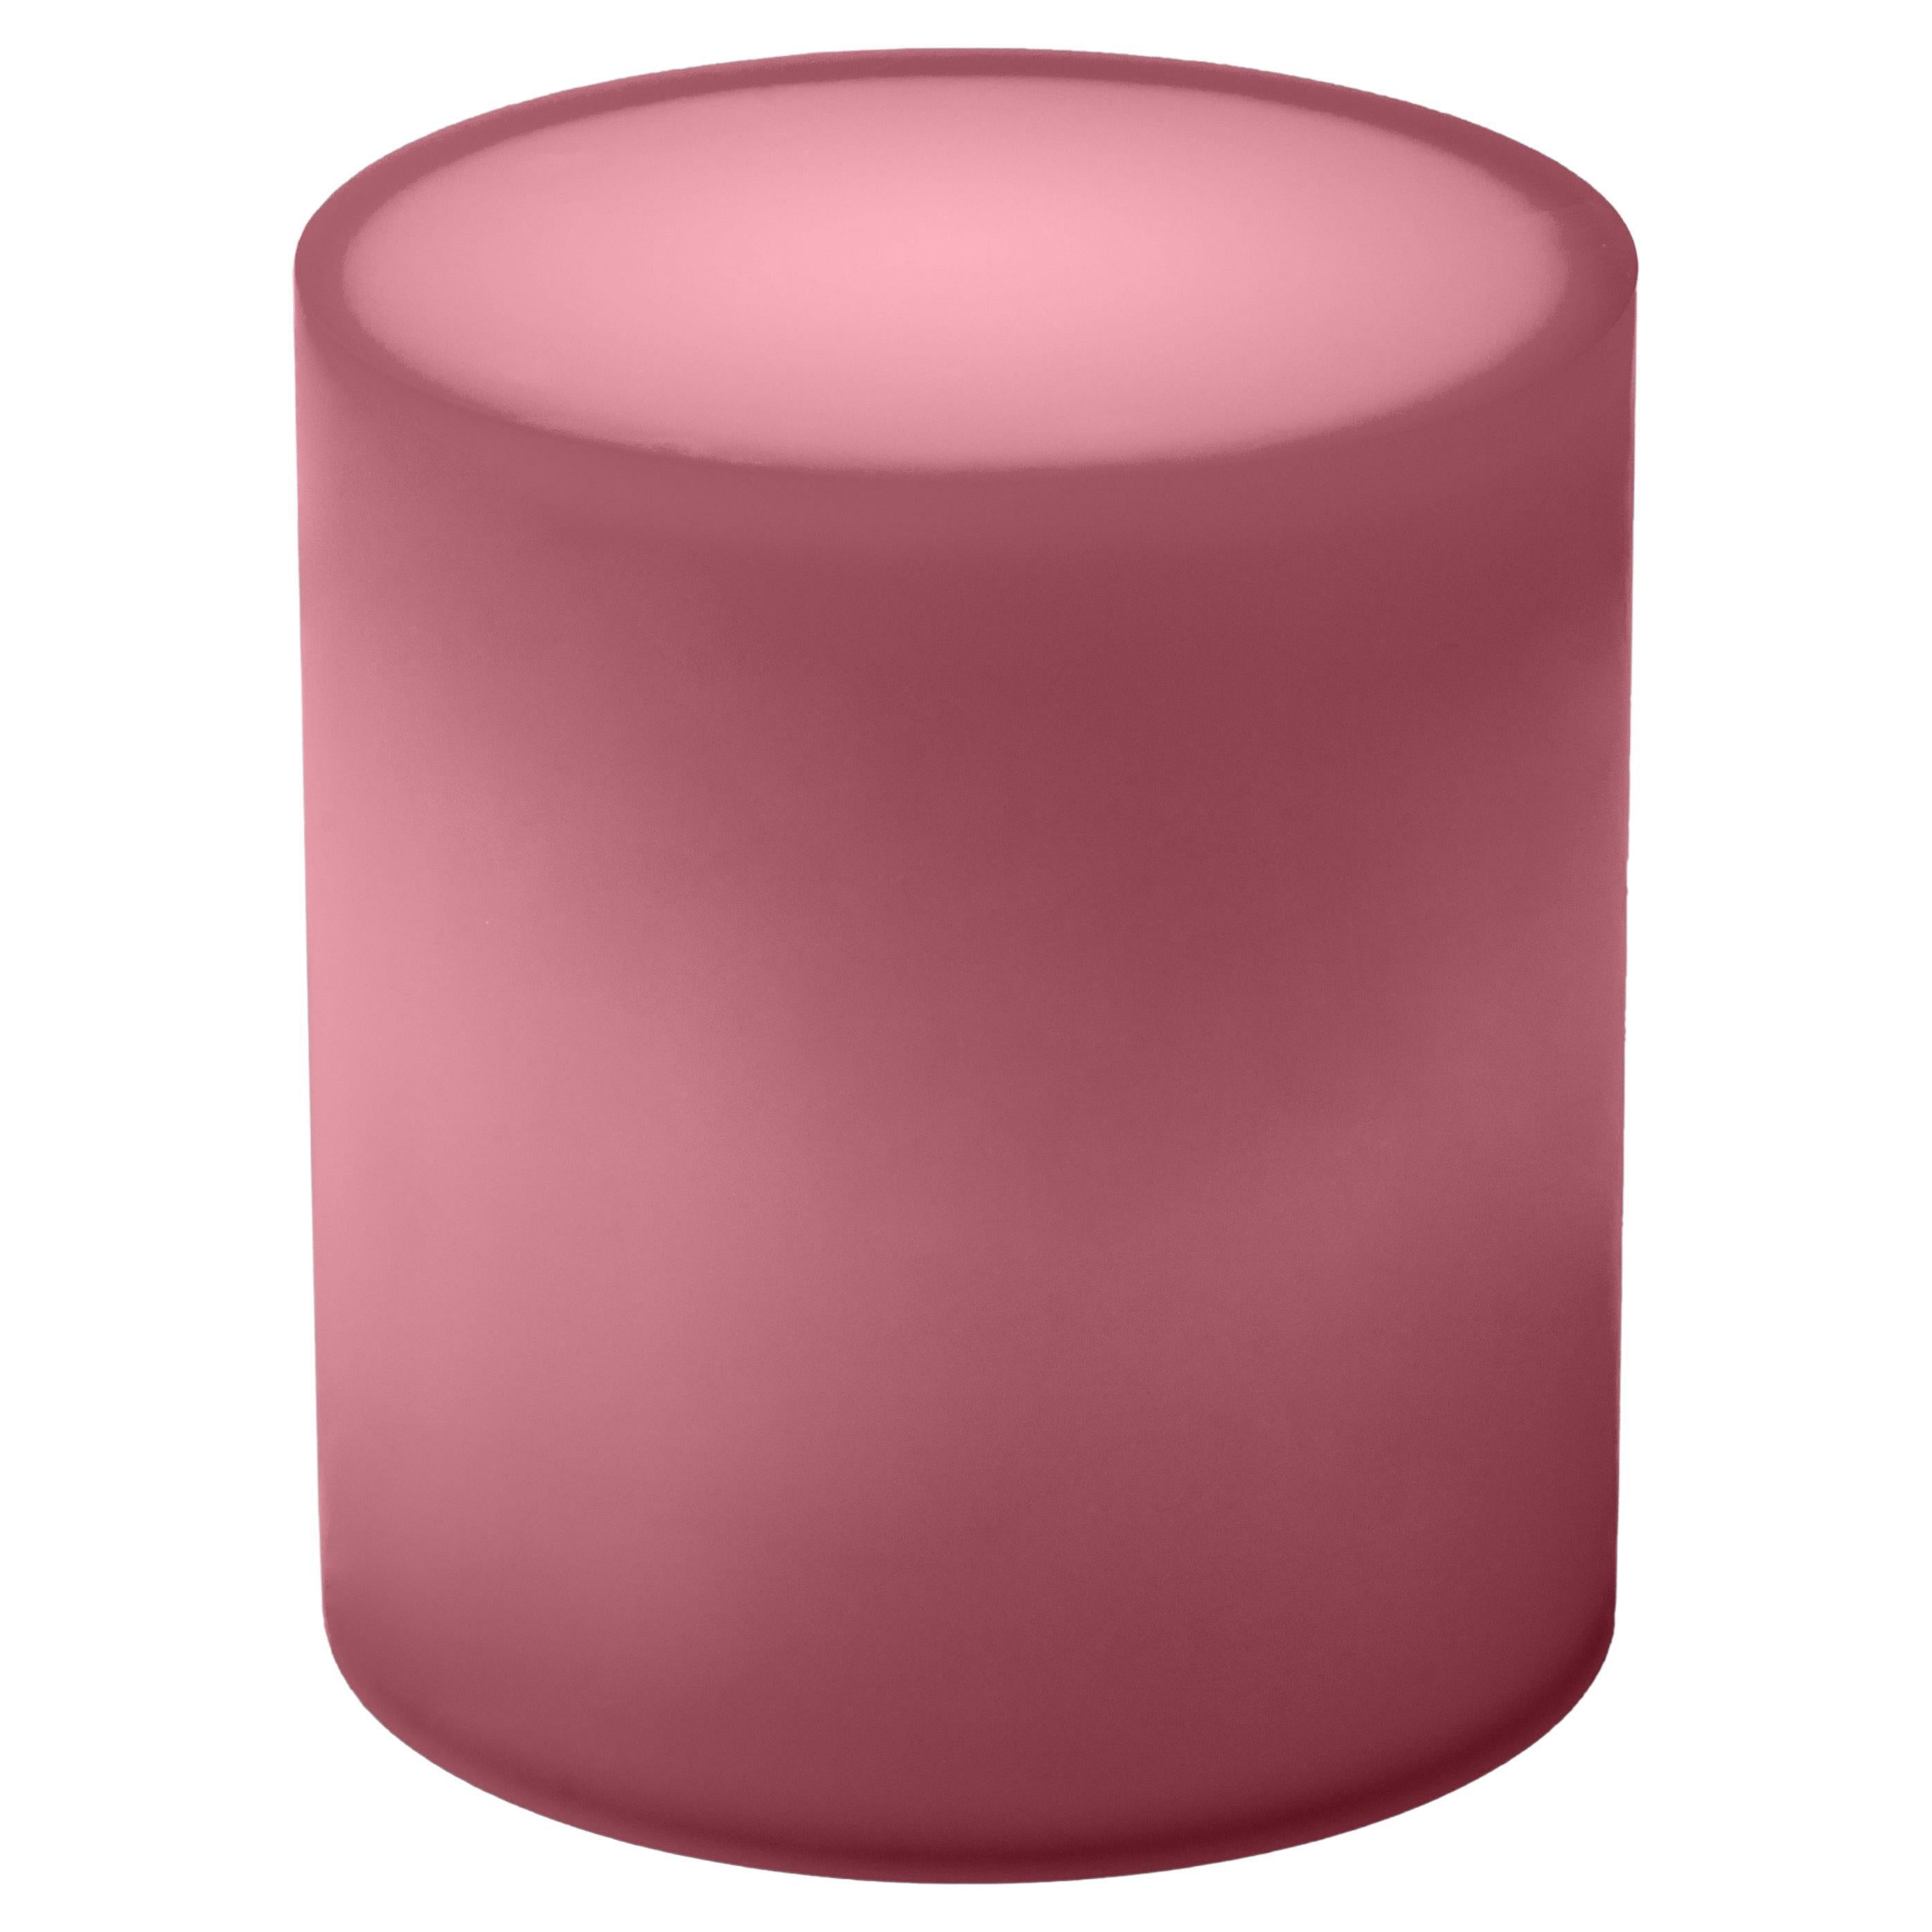 Drum Resin Side Table/Stool In Dusty Pink by Facture, REP by Tuleste Factory